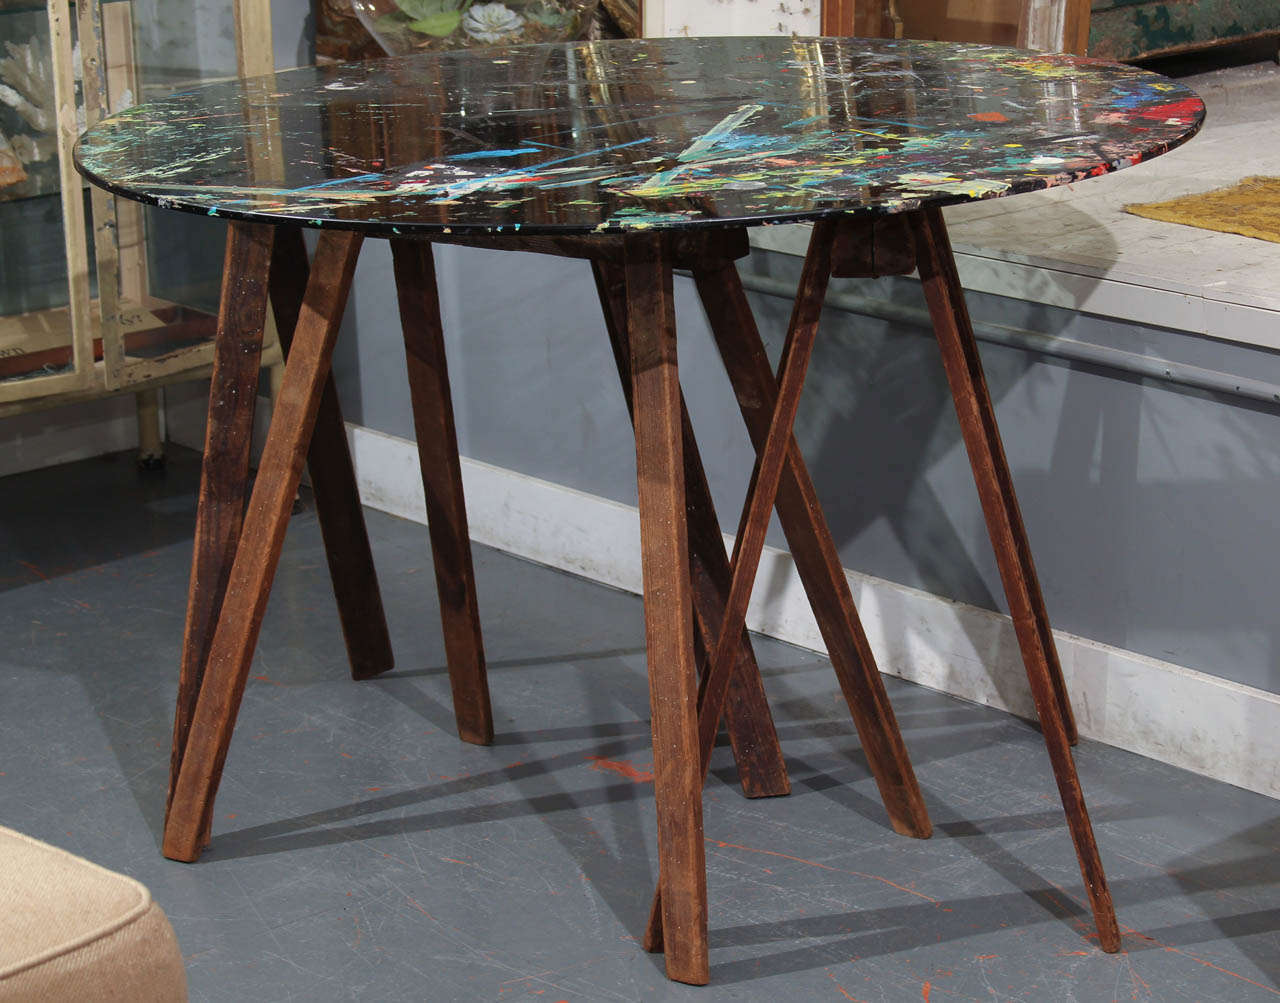 Wonderful collapsible/ portable table used by artist as work station. Heavy glass top sits atop three antique wood sawhorses that fold flat
beautiful piece of art just as it is.